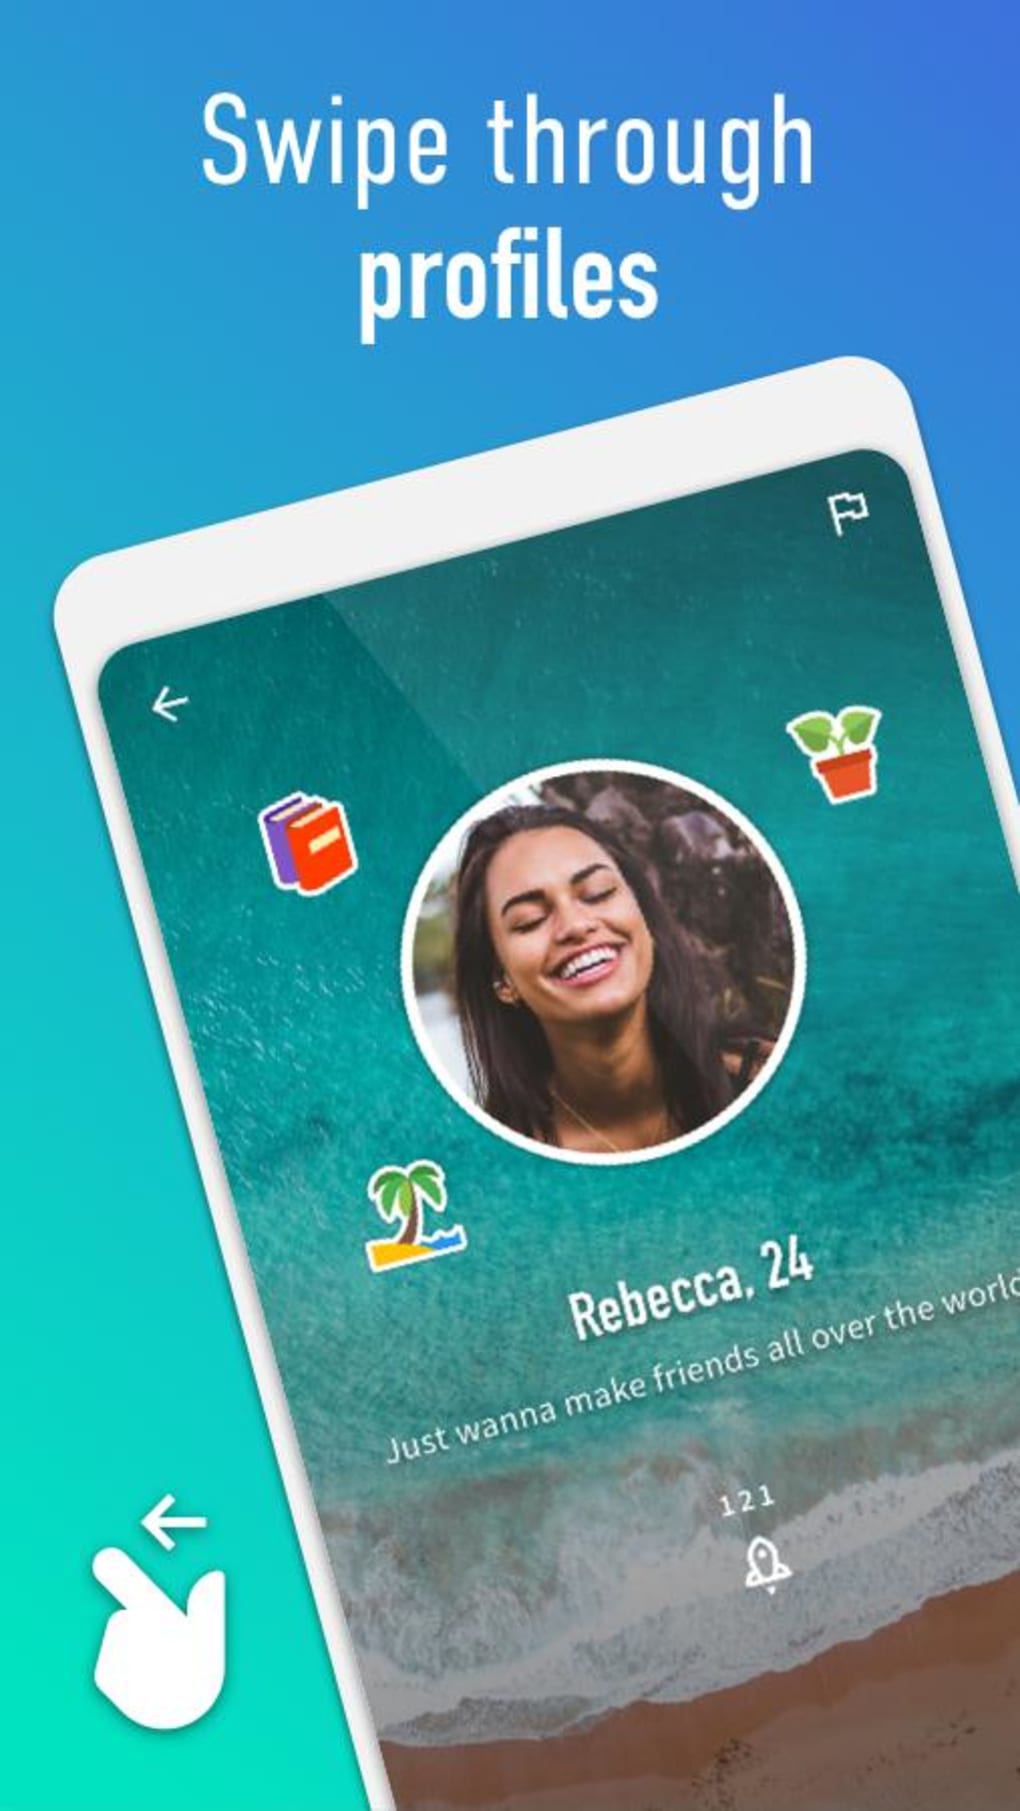 Chat with New friends through Video Chat - Live Random Video Chat app.